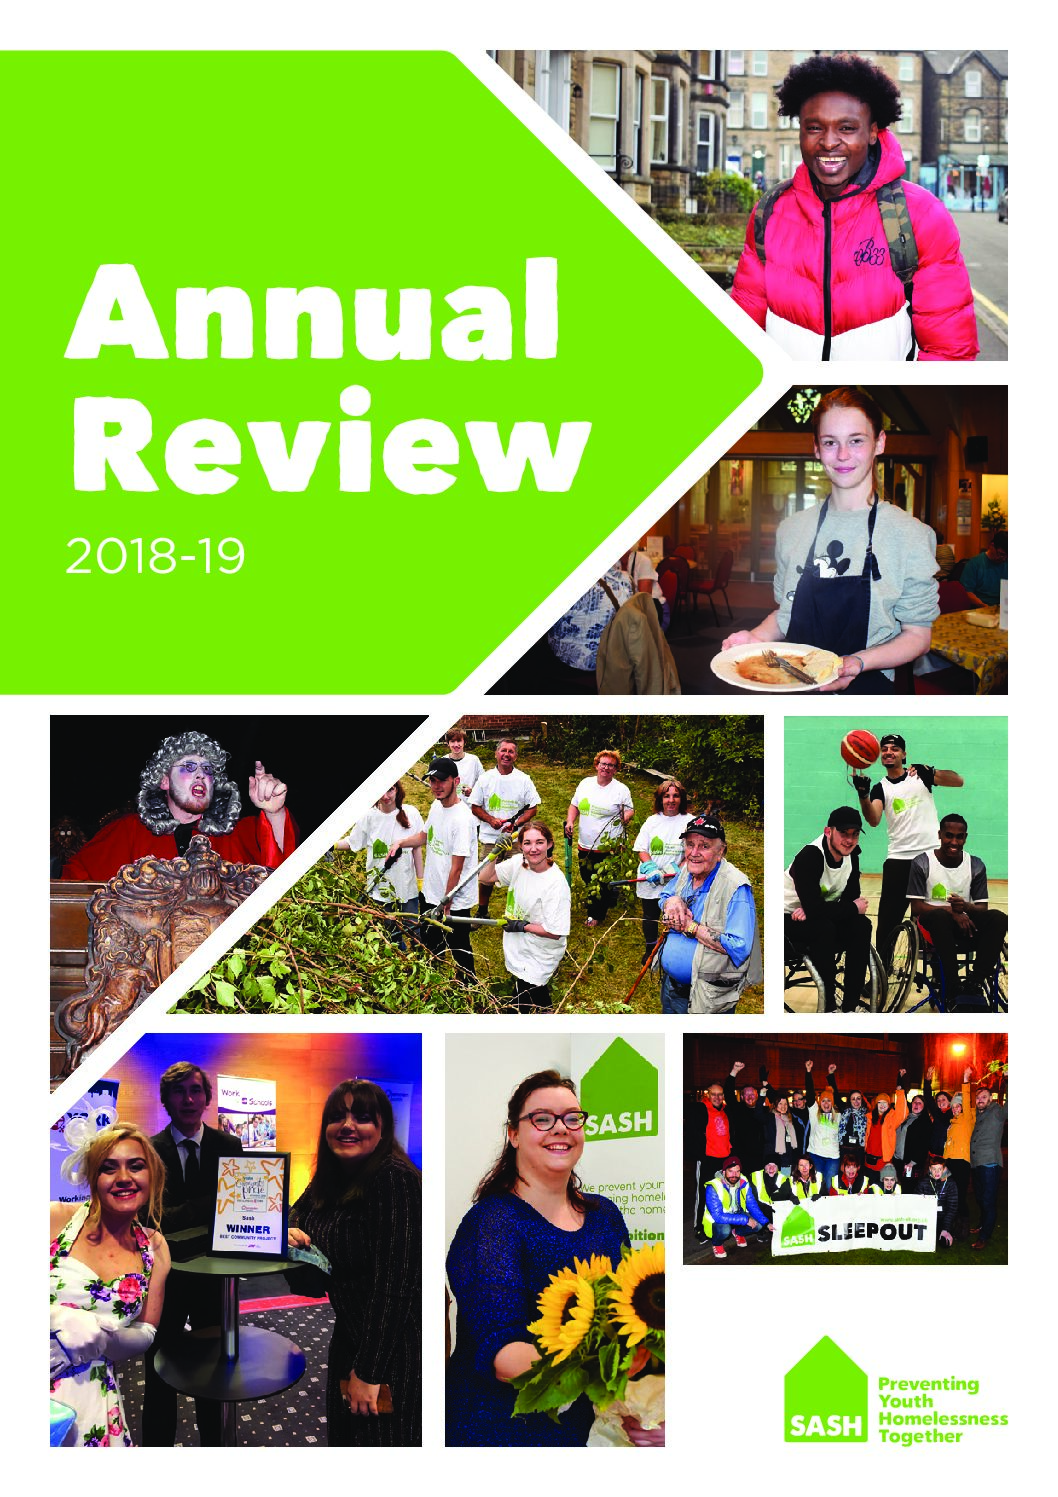 Our Annual Review 2018-19 is out!